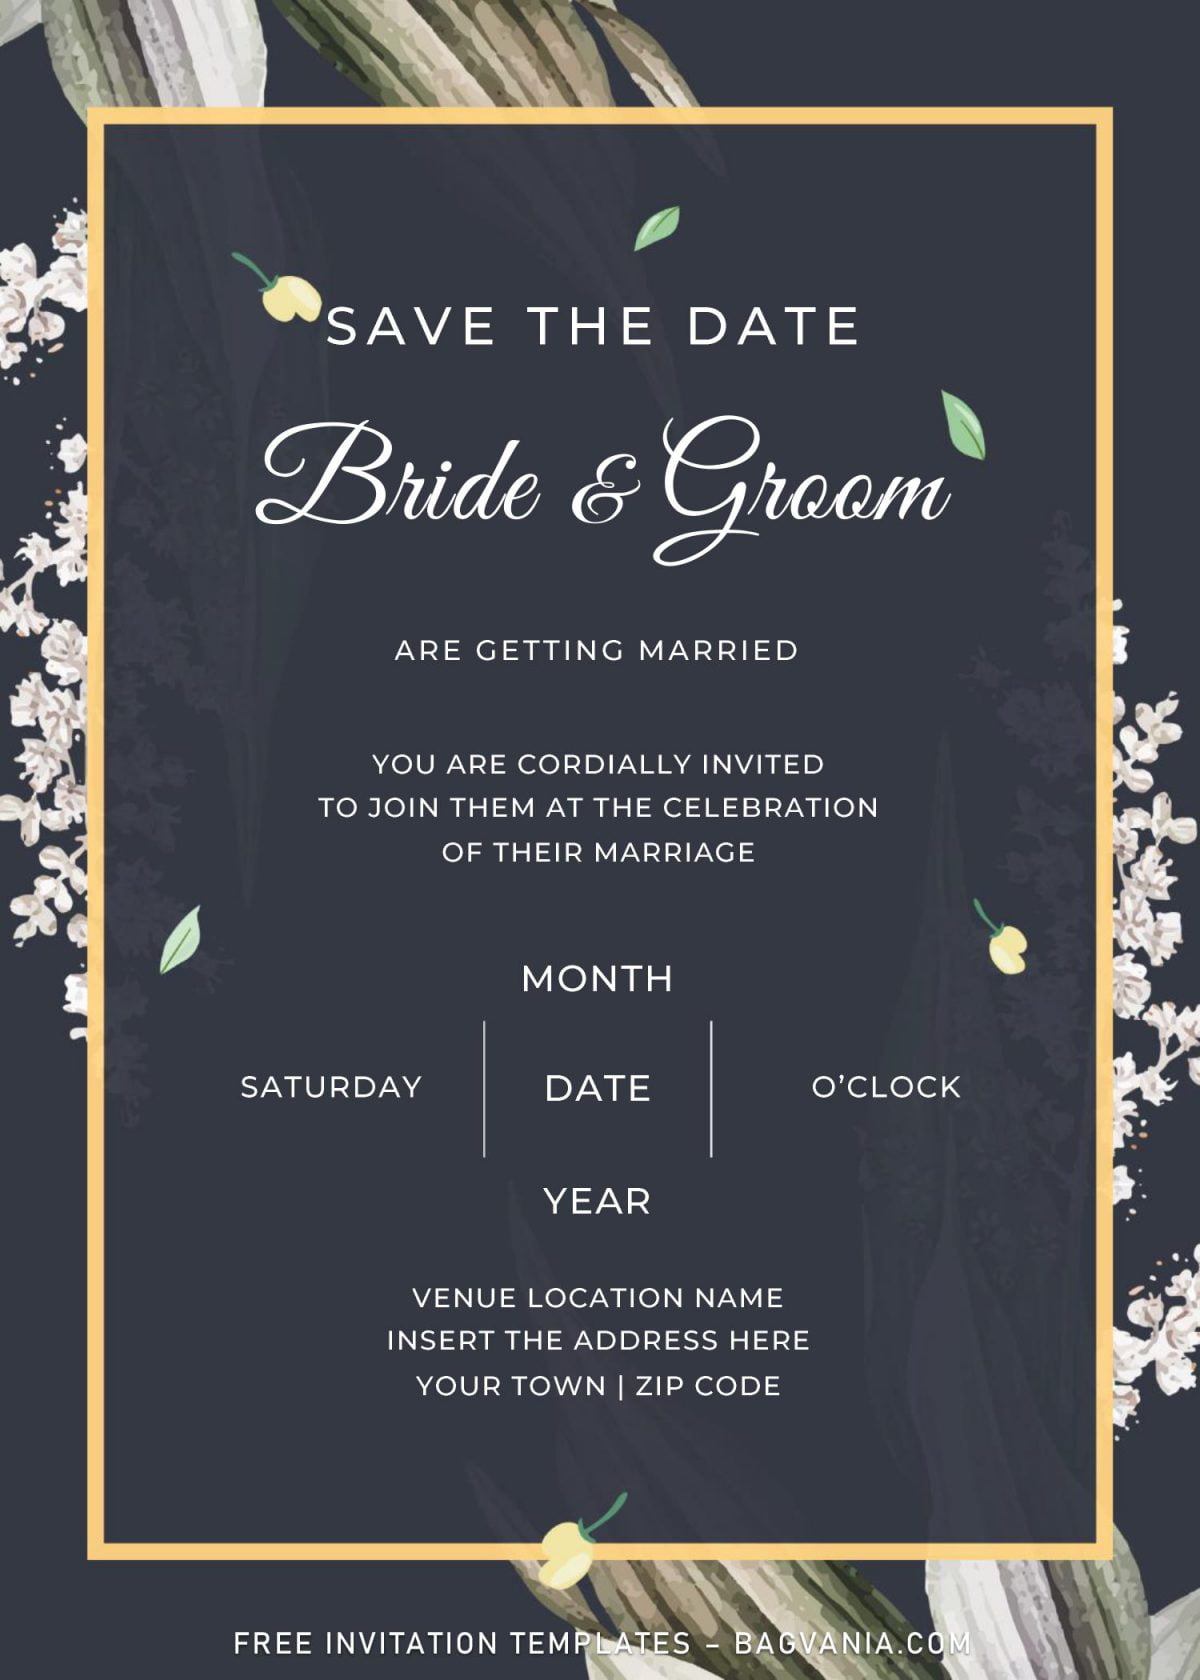 Free Greenery Wedding Invitation Templates For Word and has gold textured frame border